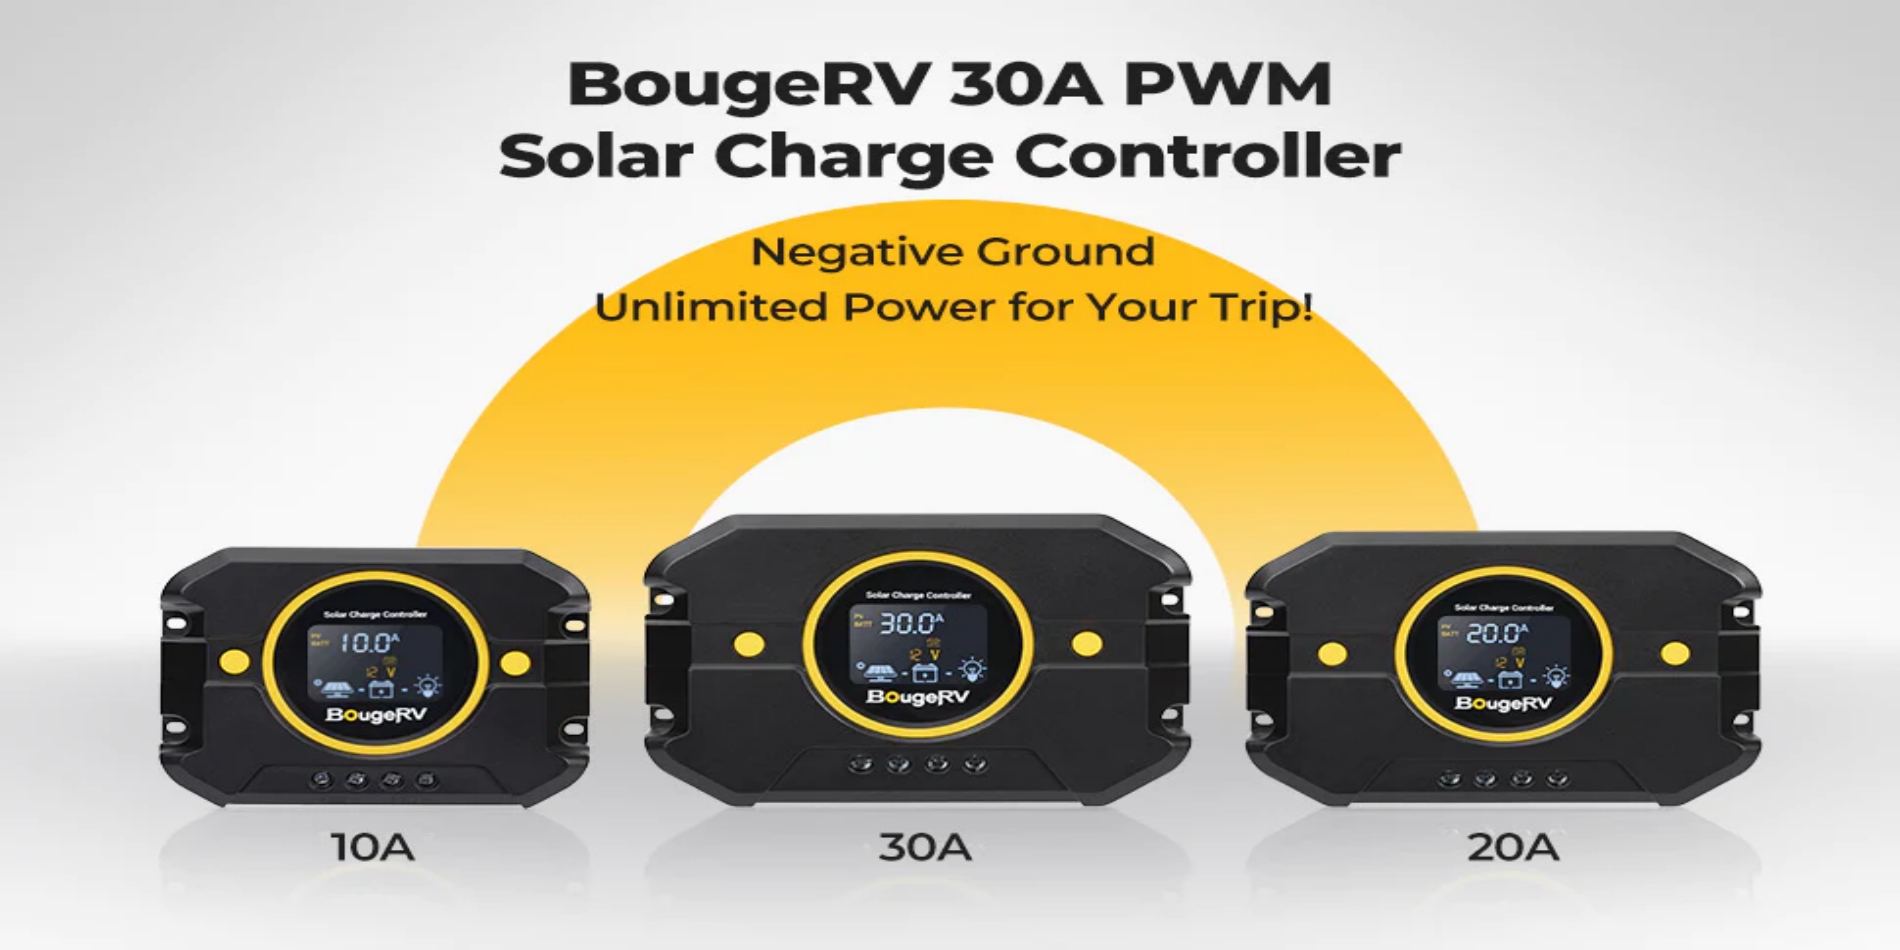 PWM Solar Charge Controllers: Everything You Need to Know